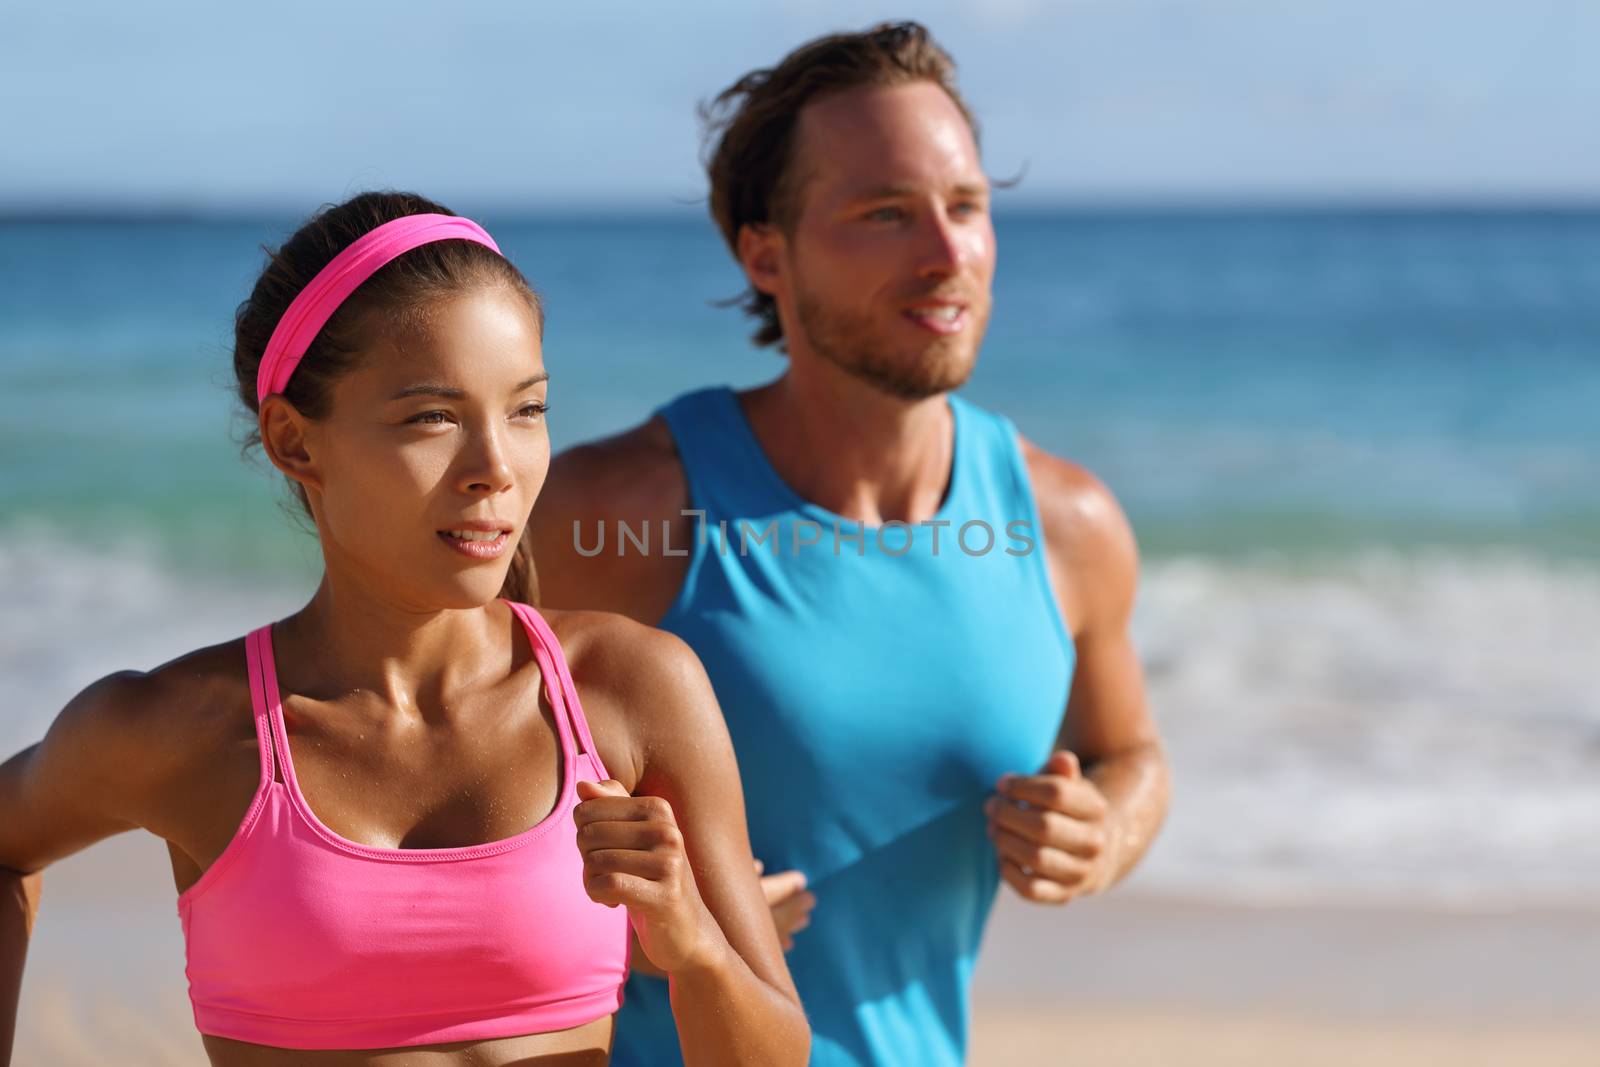 Couple runners running on beach. Interracial young adults asian woman, caucasian man, training cardio together doing outdoor workout jogging.